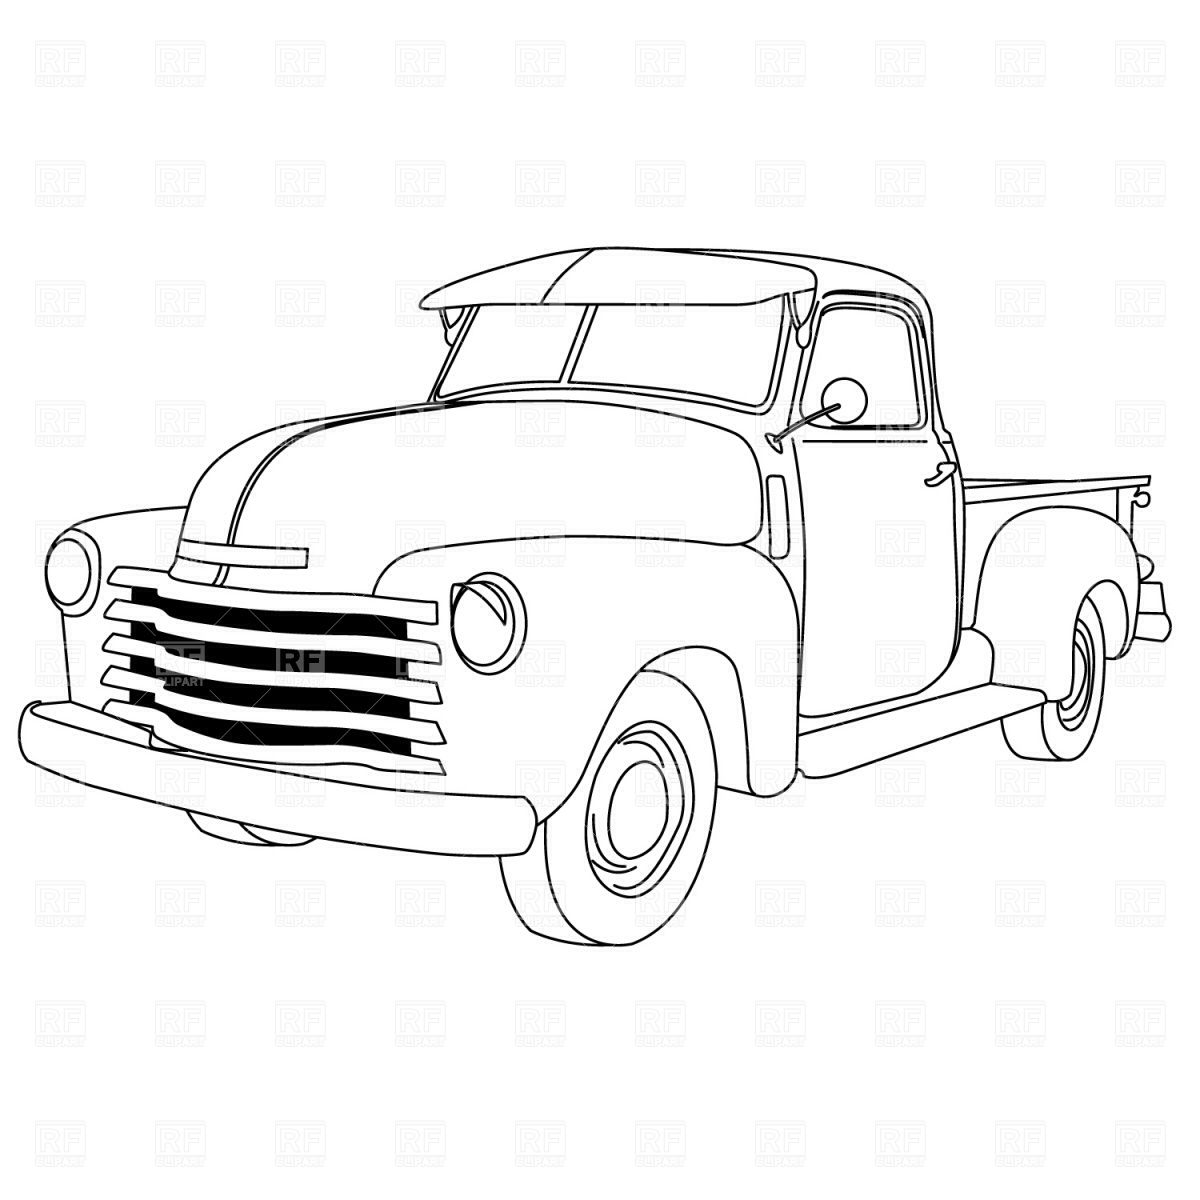 Tshirt appliqué design - use old Tshirts to make this bright and colorful  on a new T | Truck coloring pages, Coloring pages, Old pickup trucks